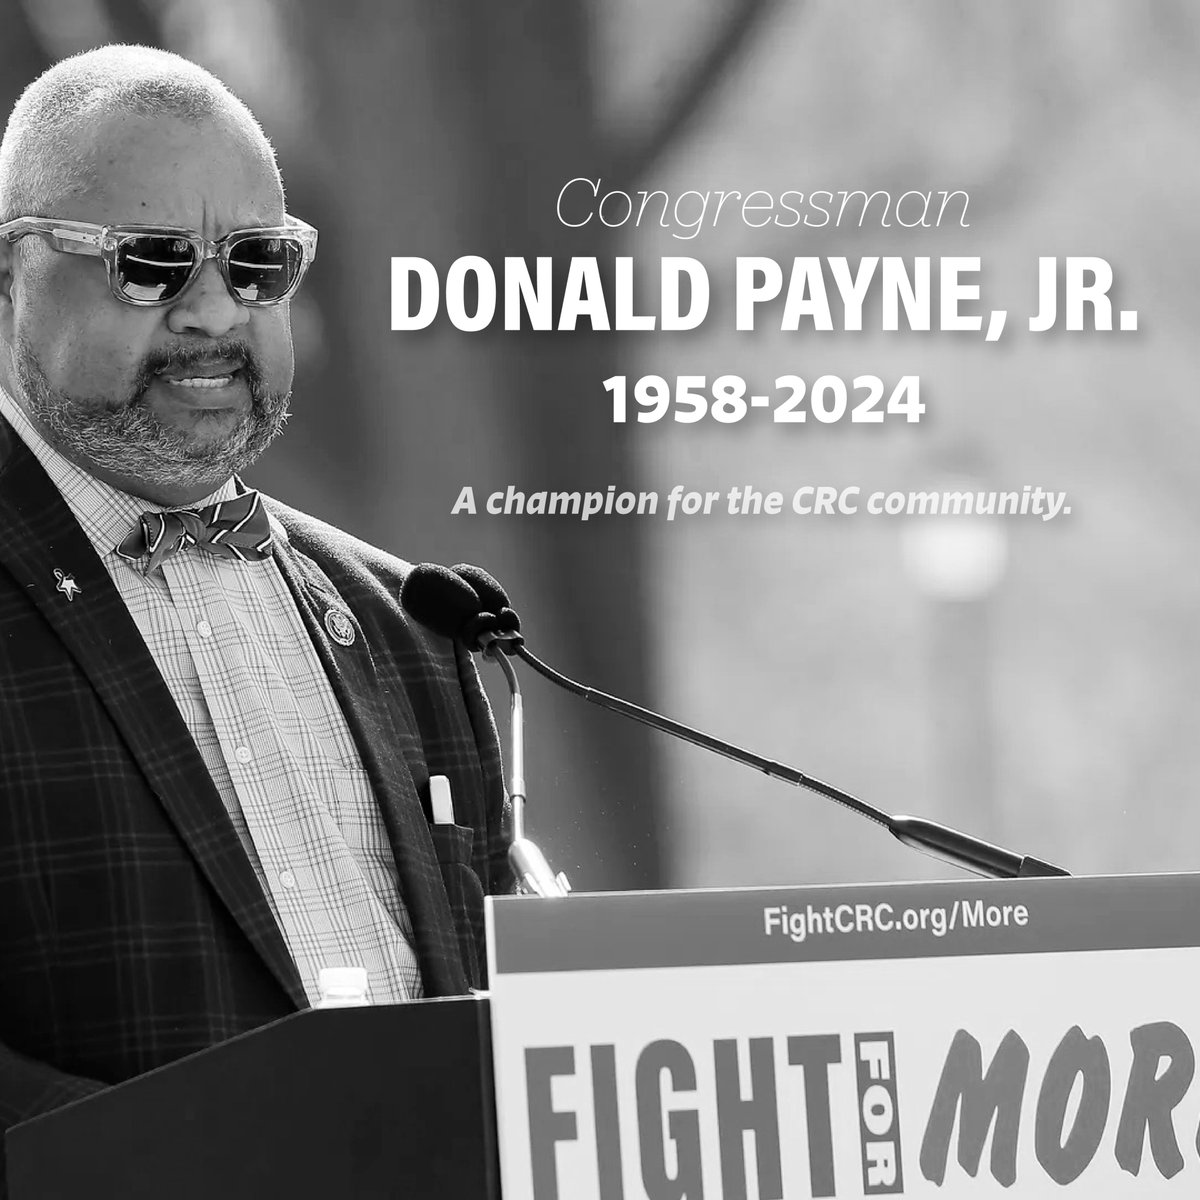 We are deeply saddened to share the news that Fight Colorectal Cancer Friend, Champion, and Co-Chair of the Congressional Colorectal Cancer Caucus, Representative Donald M. Payne Jr., has passed away today. Representative Payne was a fierce and relentless champion for this fight